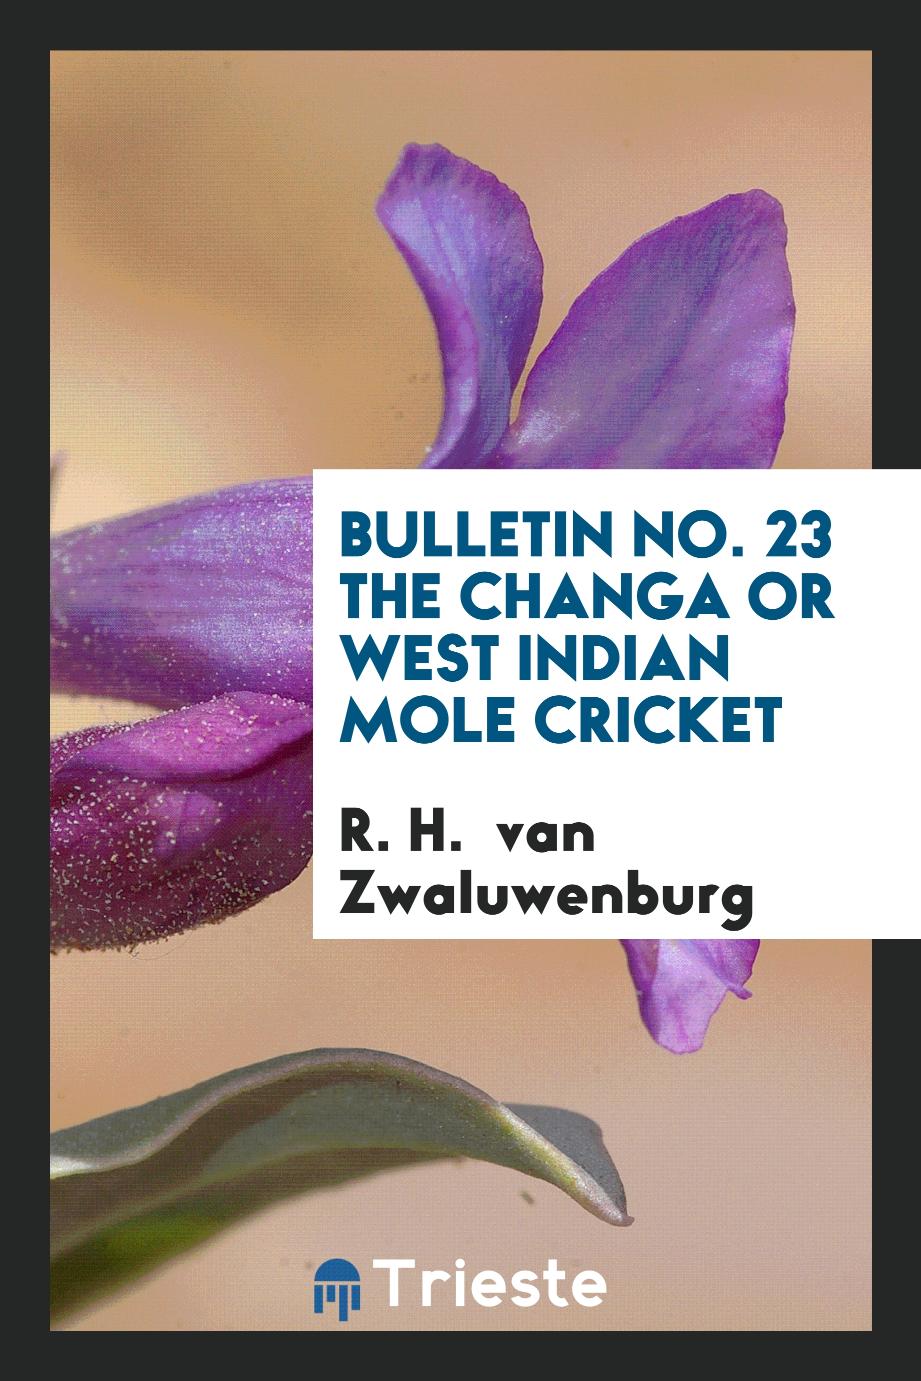 Bulletin No. 23 The changa or west indian mole cricket